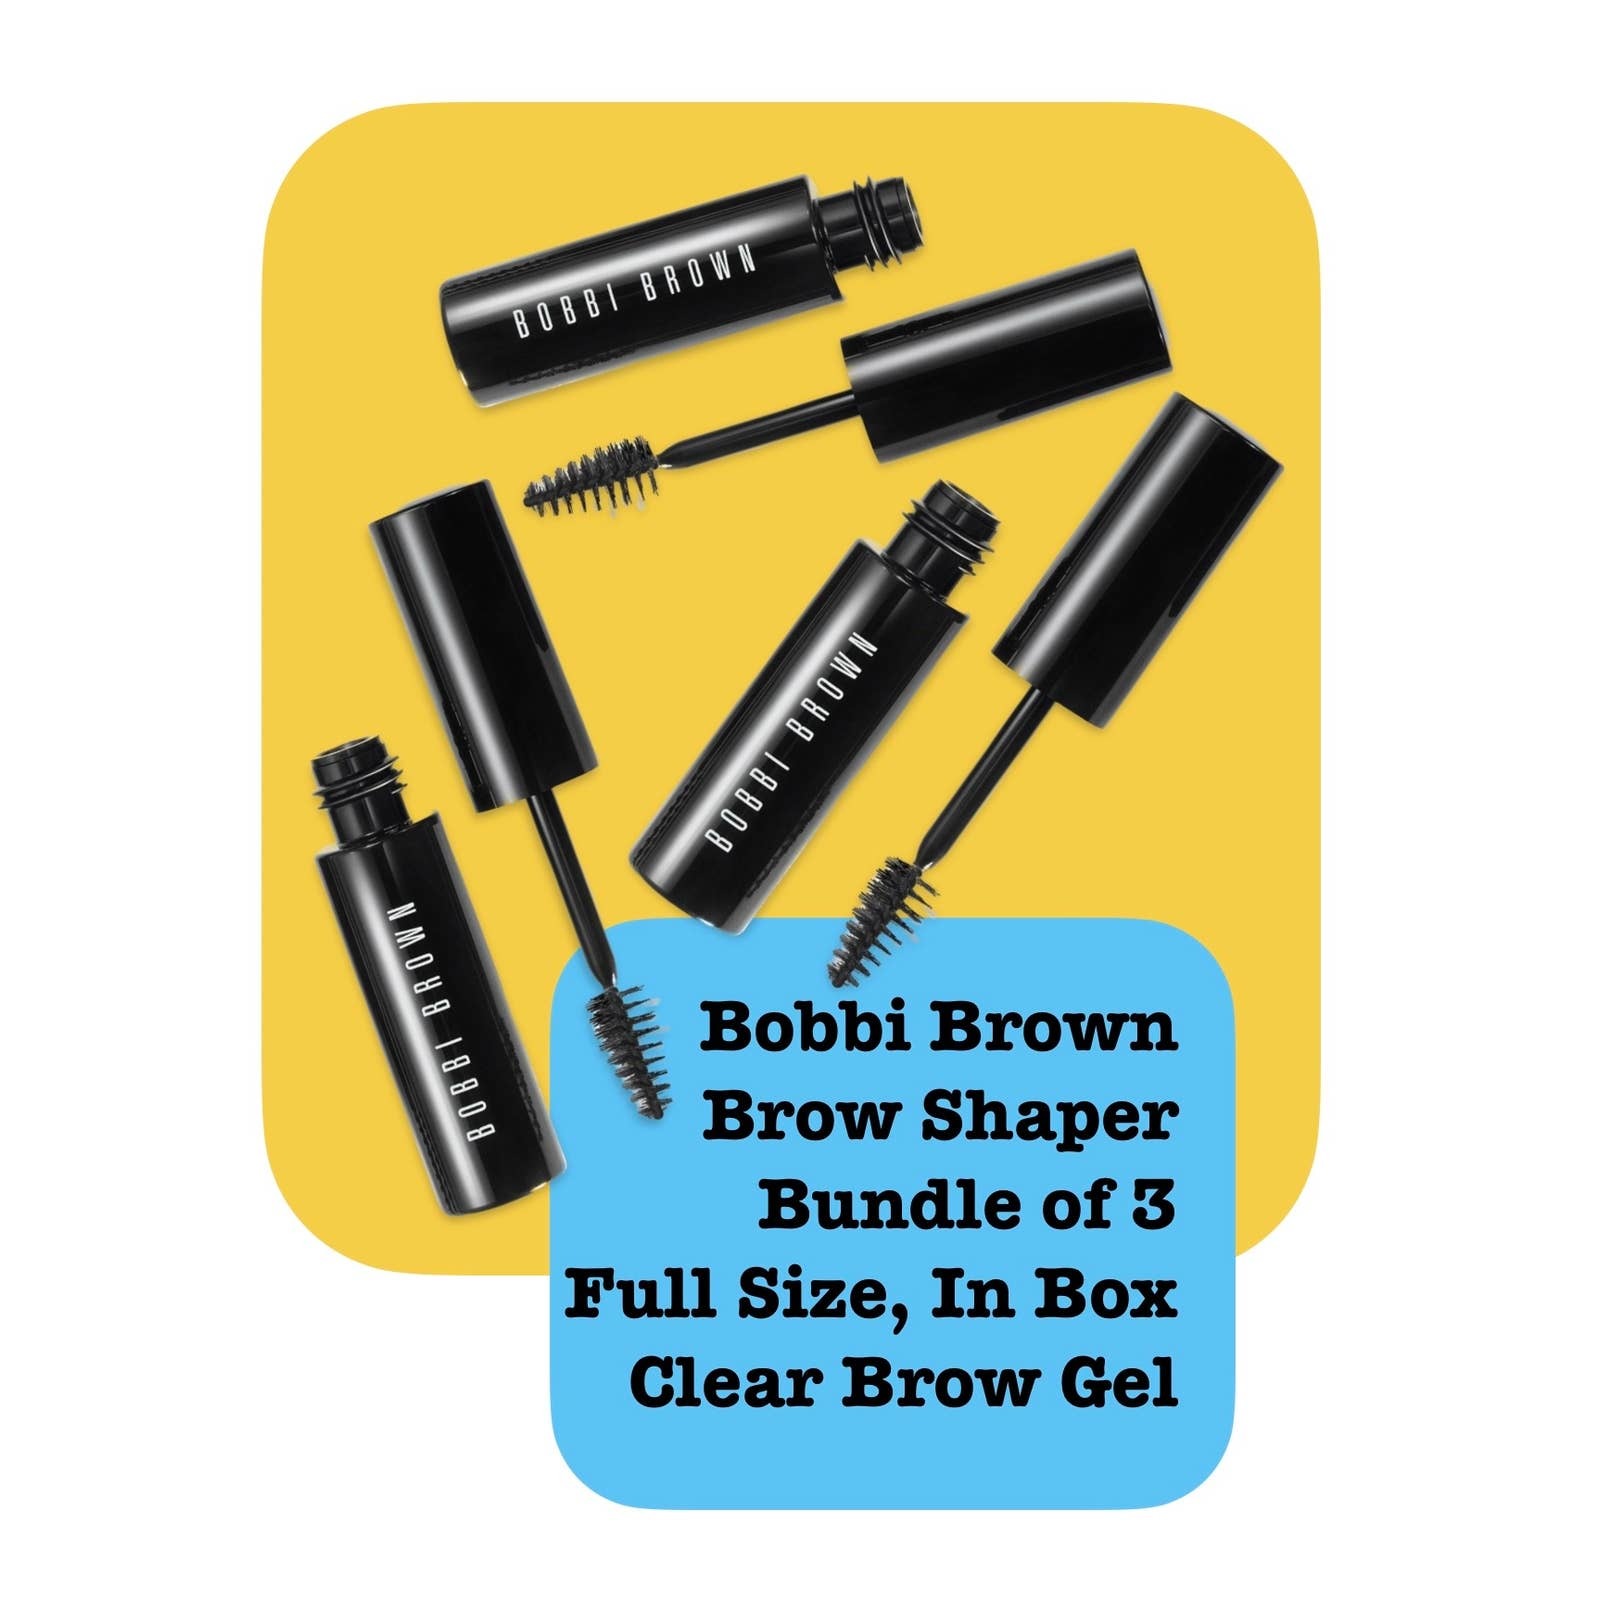 Bobbi Brown Clear Brow Gel | Pack of 3 | Full Size | New in Box - $25.00 - $30.00